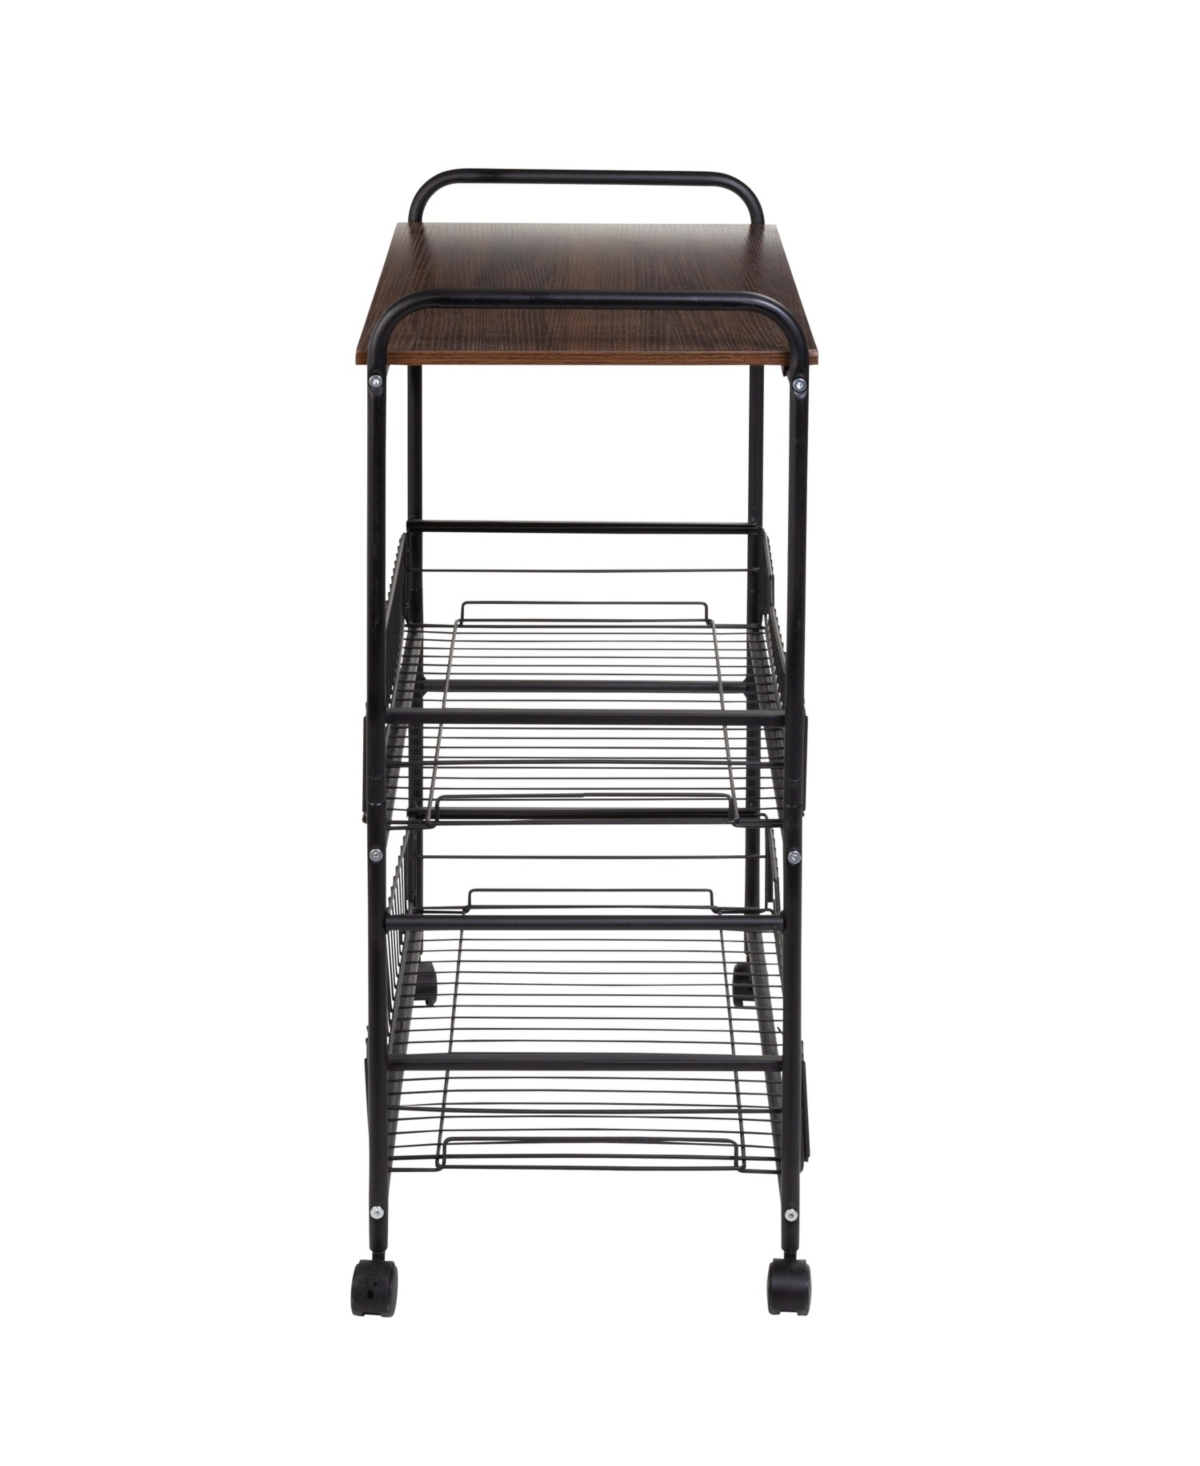 Shop Honey Can Do 3 Tier Wood Shelf And Pull-out Baskets Rolling Cart In Black